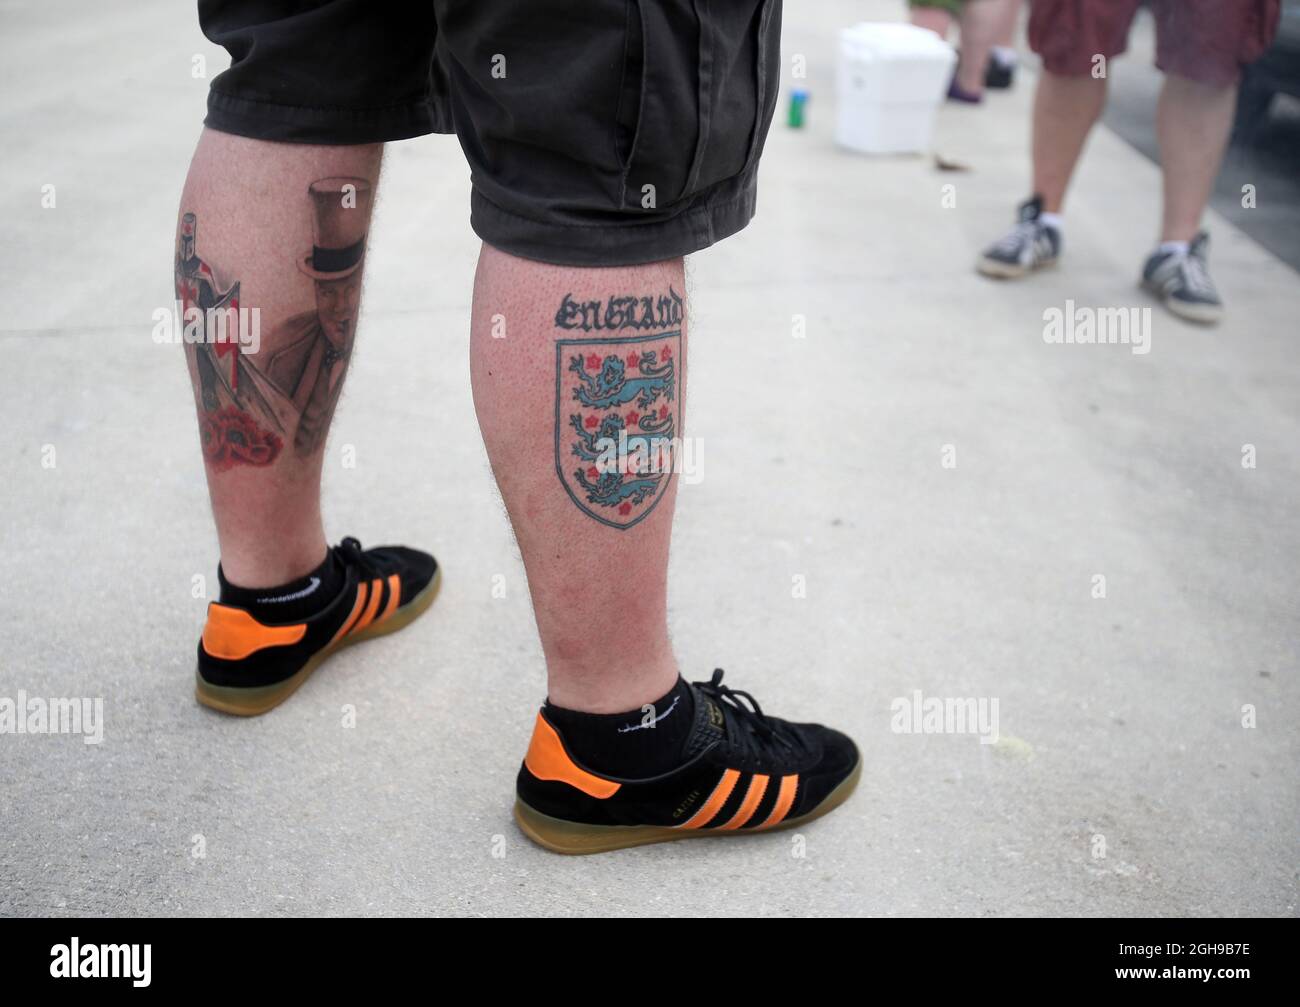 A fan with an England tattoo during the international friendly soccer match between England and Honduras at Sun Life Stadium in Miami, Florida on June 7, 2014. Pic David Klein. Stock Photo